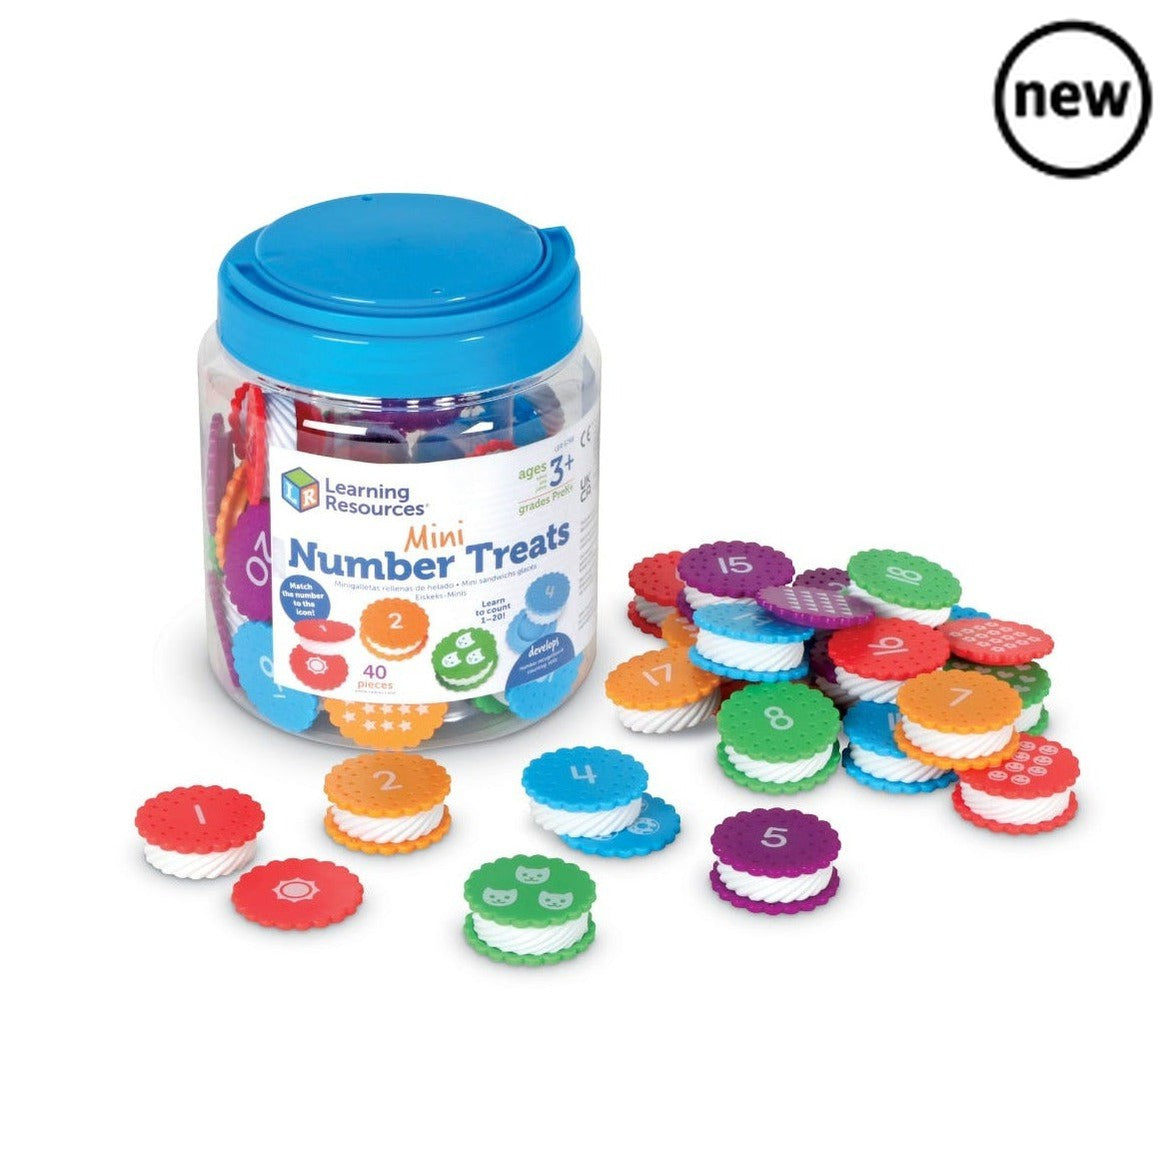 Mini Number Treats, Each colourful cookie toy in this set puts a playful twist on learning numbers and colours. One side of each cookie toy features a number from 1–20, and the other has a picture of the corresponding number of dolphins, beach balls, and more. Twist open each cookie to reveal a fun tactile texture hidden inside! Includes 20 x 2-piece cookies. Mini Number Treats This Mini Number Treats set of 20 mini number treats introduces children to number and counting skills through engaging hands-on pl